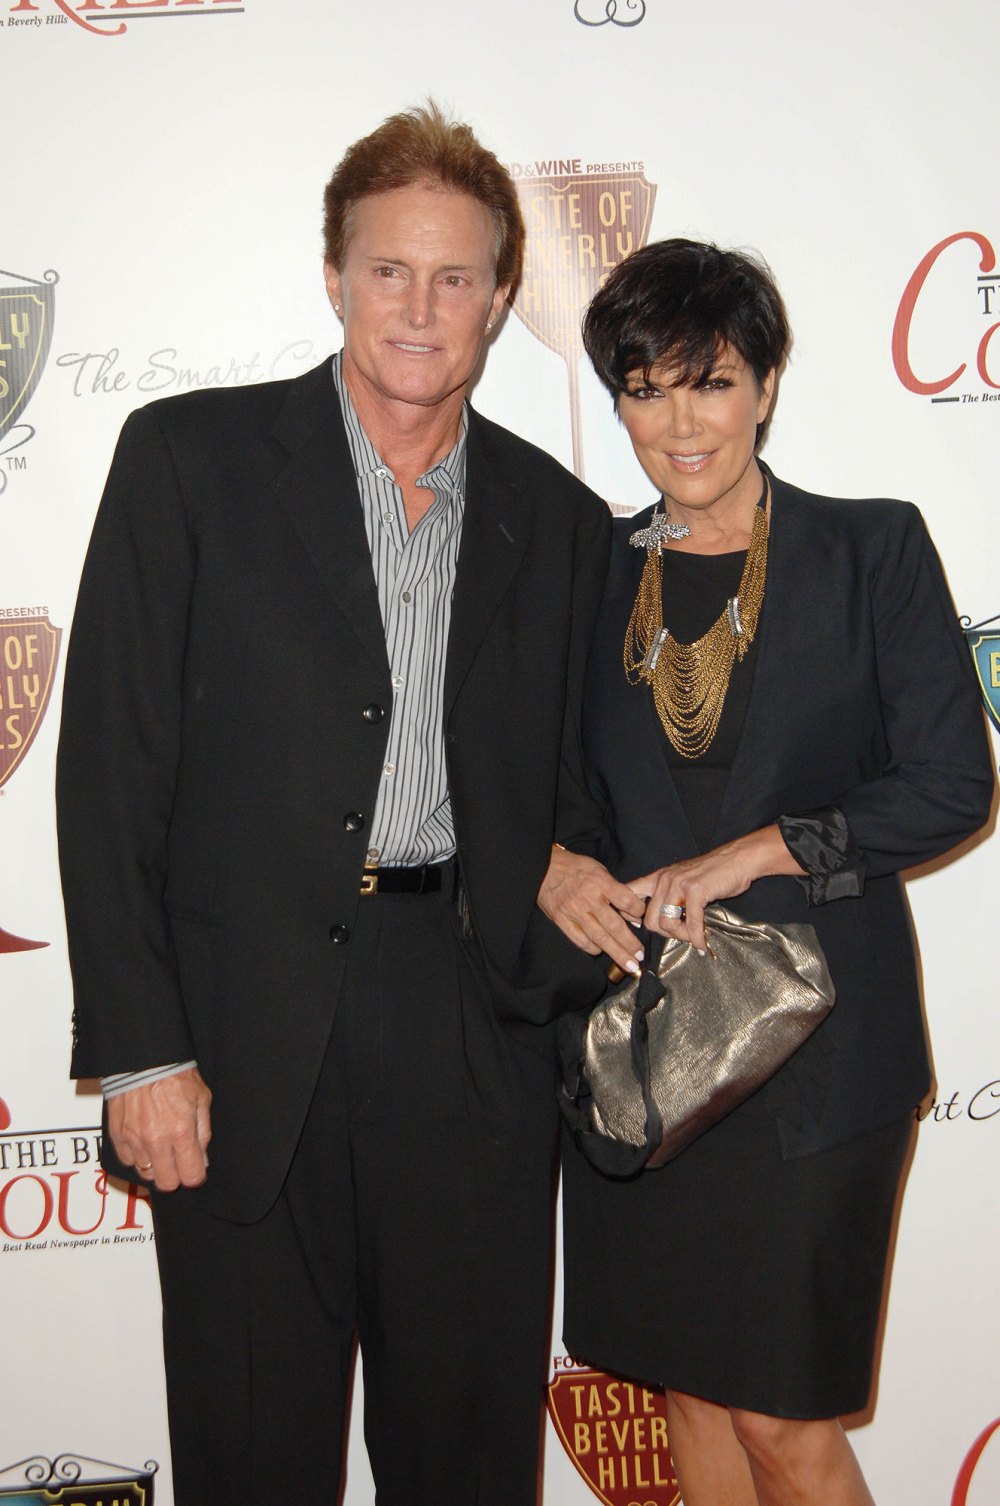 Kris, Bruce Jenner Announce Their Separation on Keeping Up With the Kardashians Season 9 Premiere